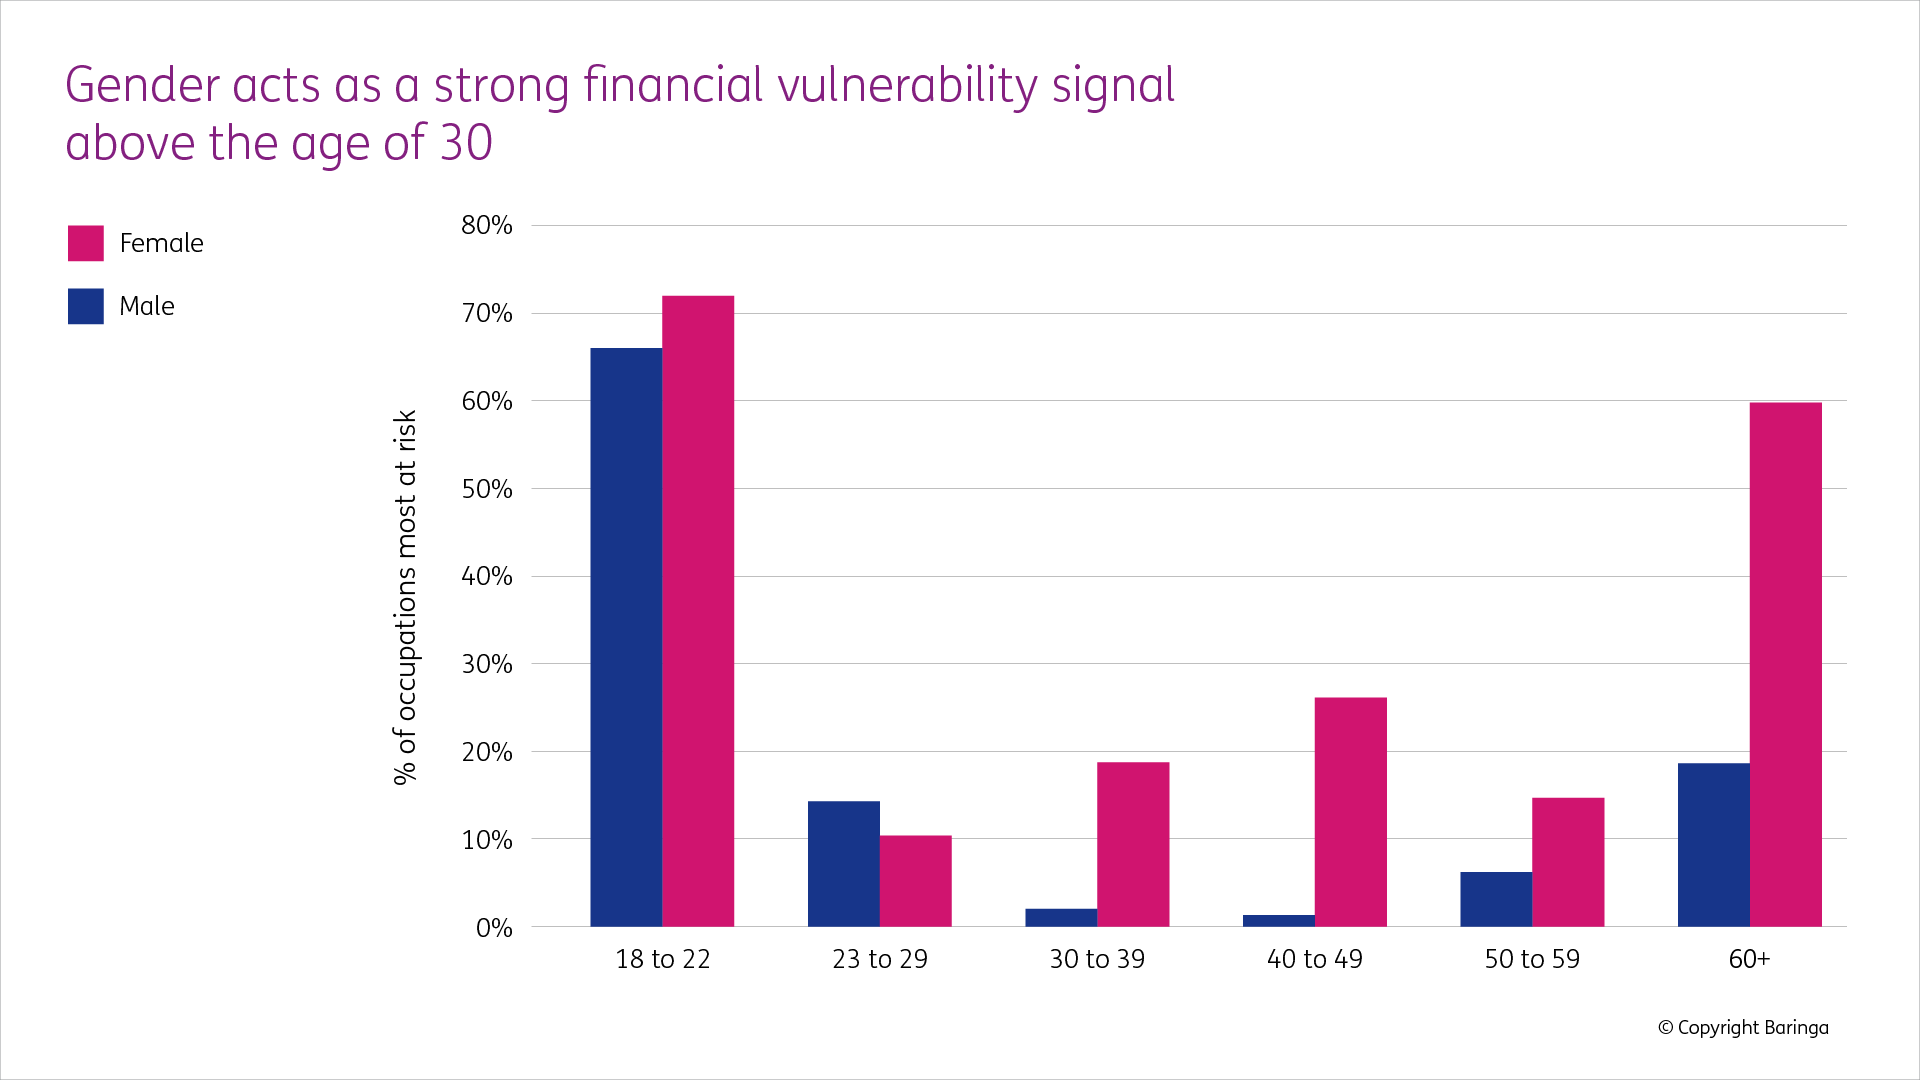 Graphic showing how gender factors in financial vulnerability across age groups